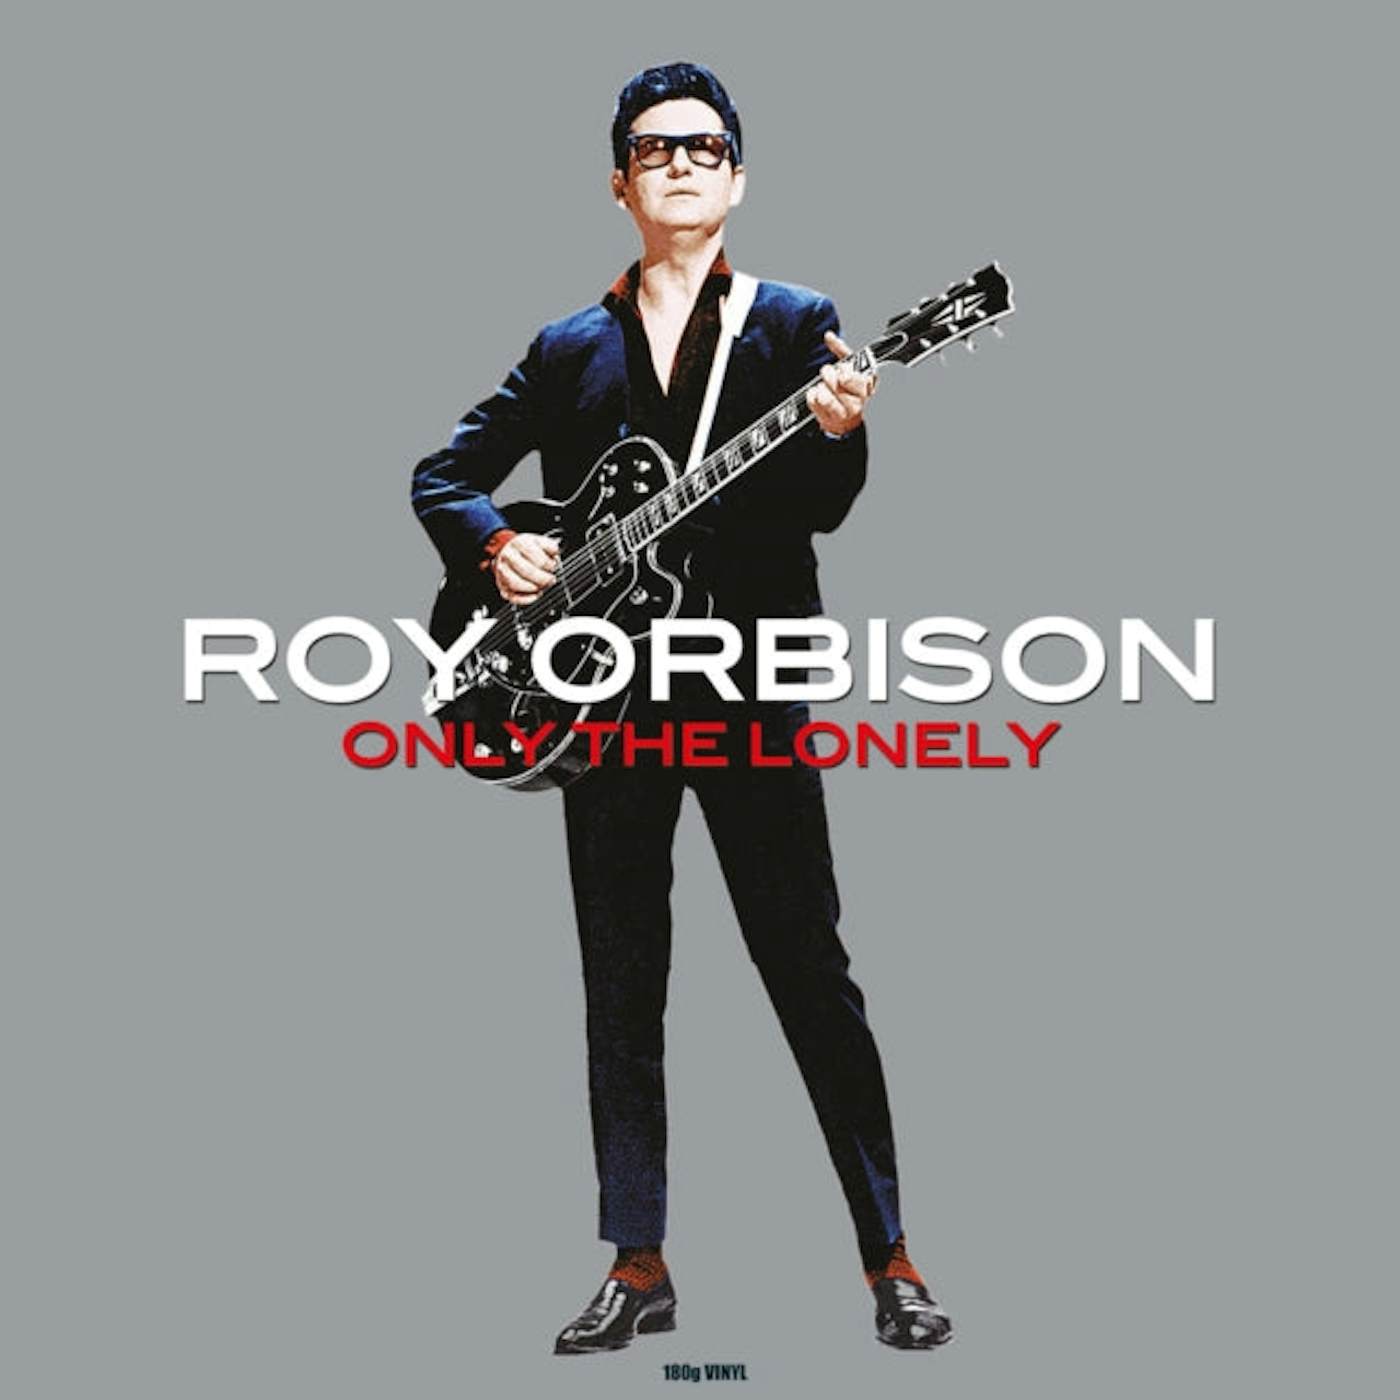 Roy Orbison LP - Only The Lonely (Vinyl)